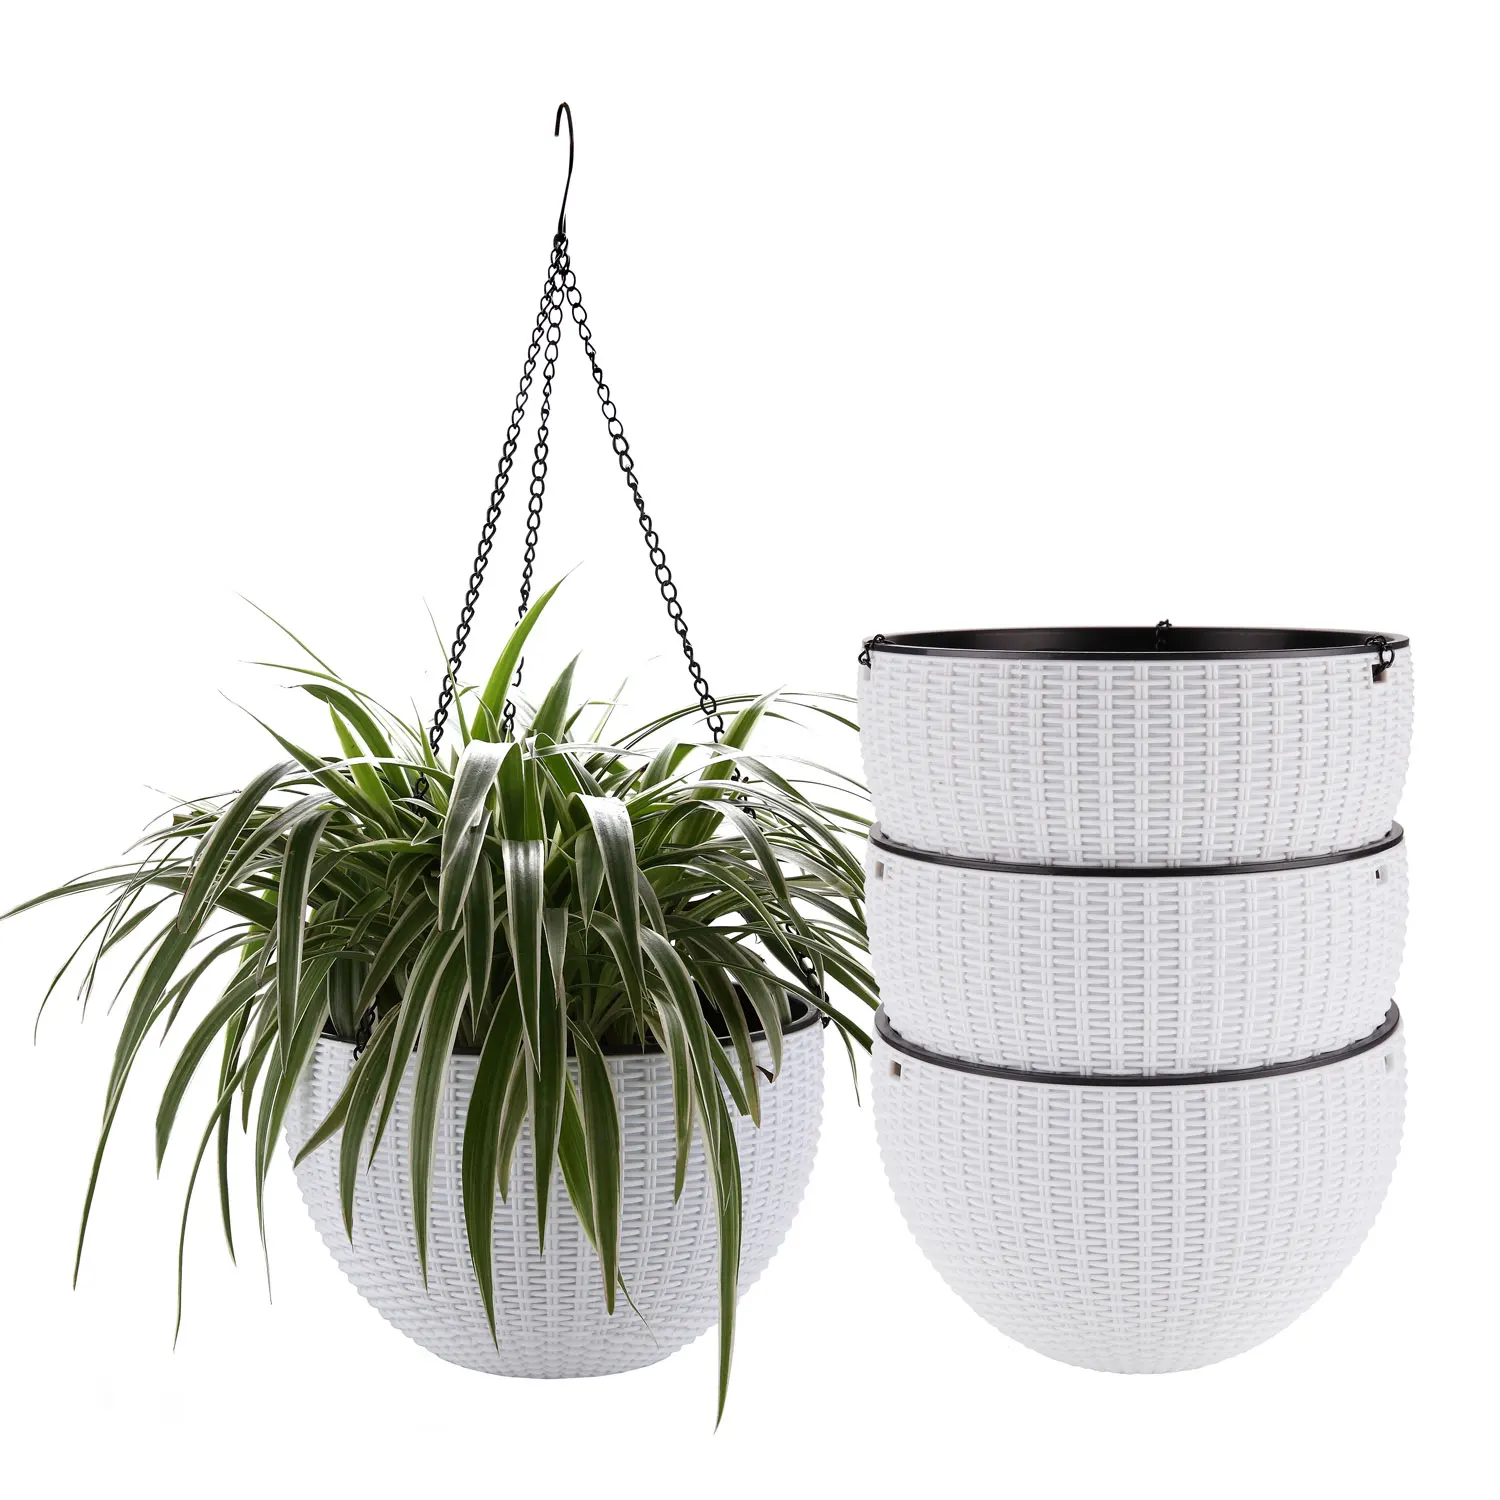 

T4U 10" Self Watering Hanging Planter Basket with Chain White, Modern Plastic Flower Pot Hanger Round Plant Holder Pack of 4